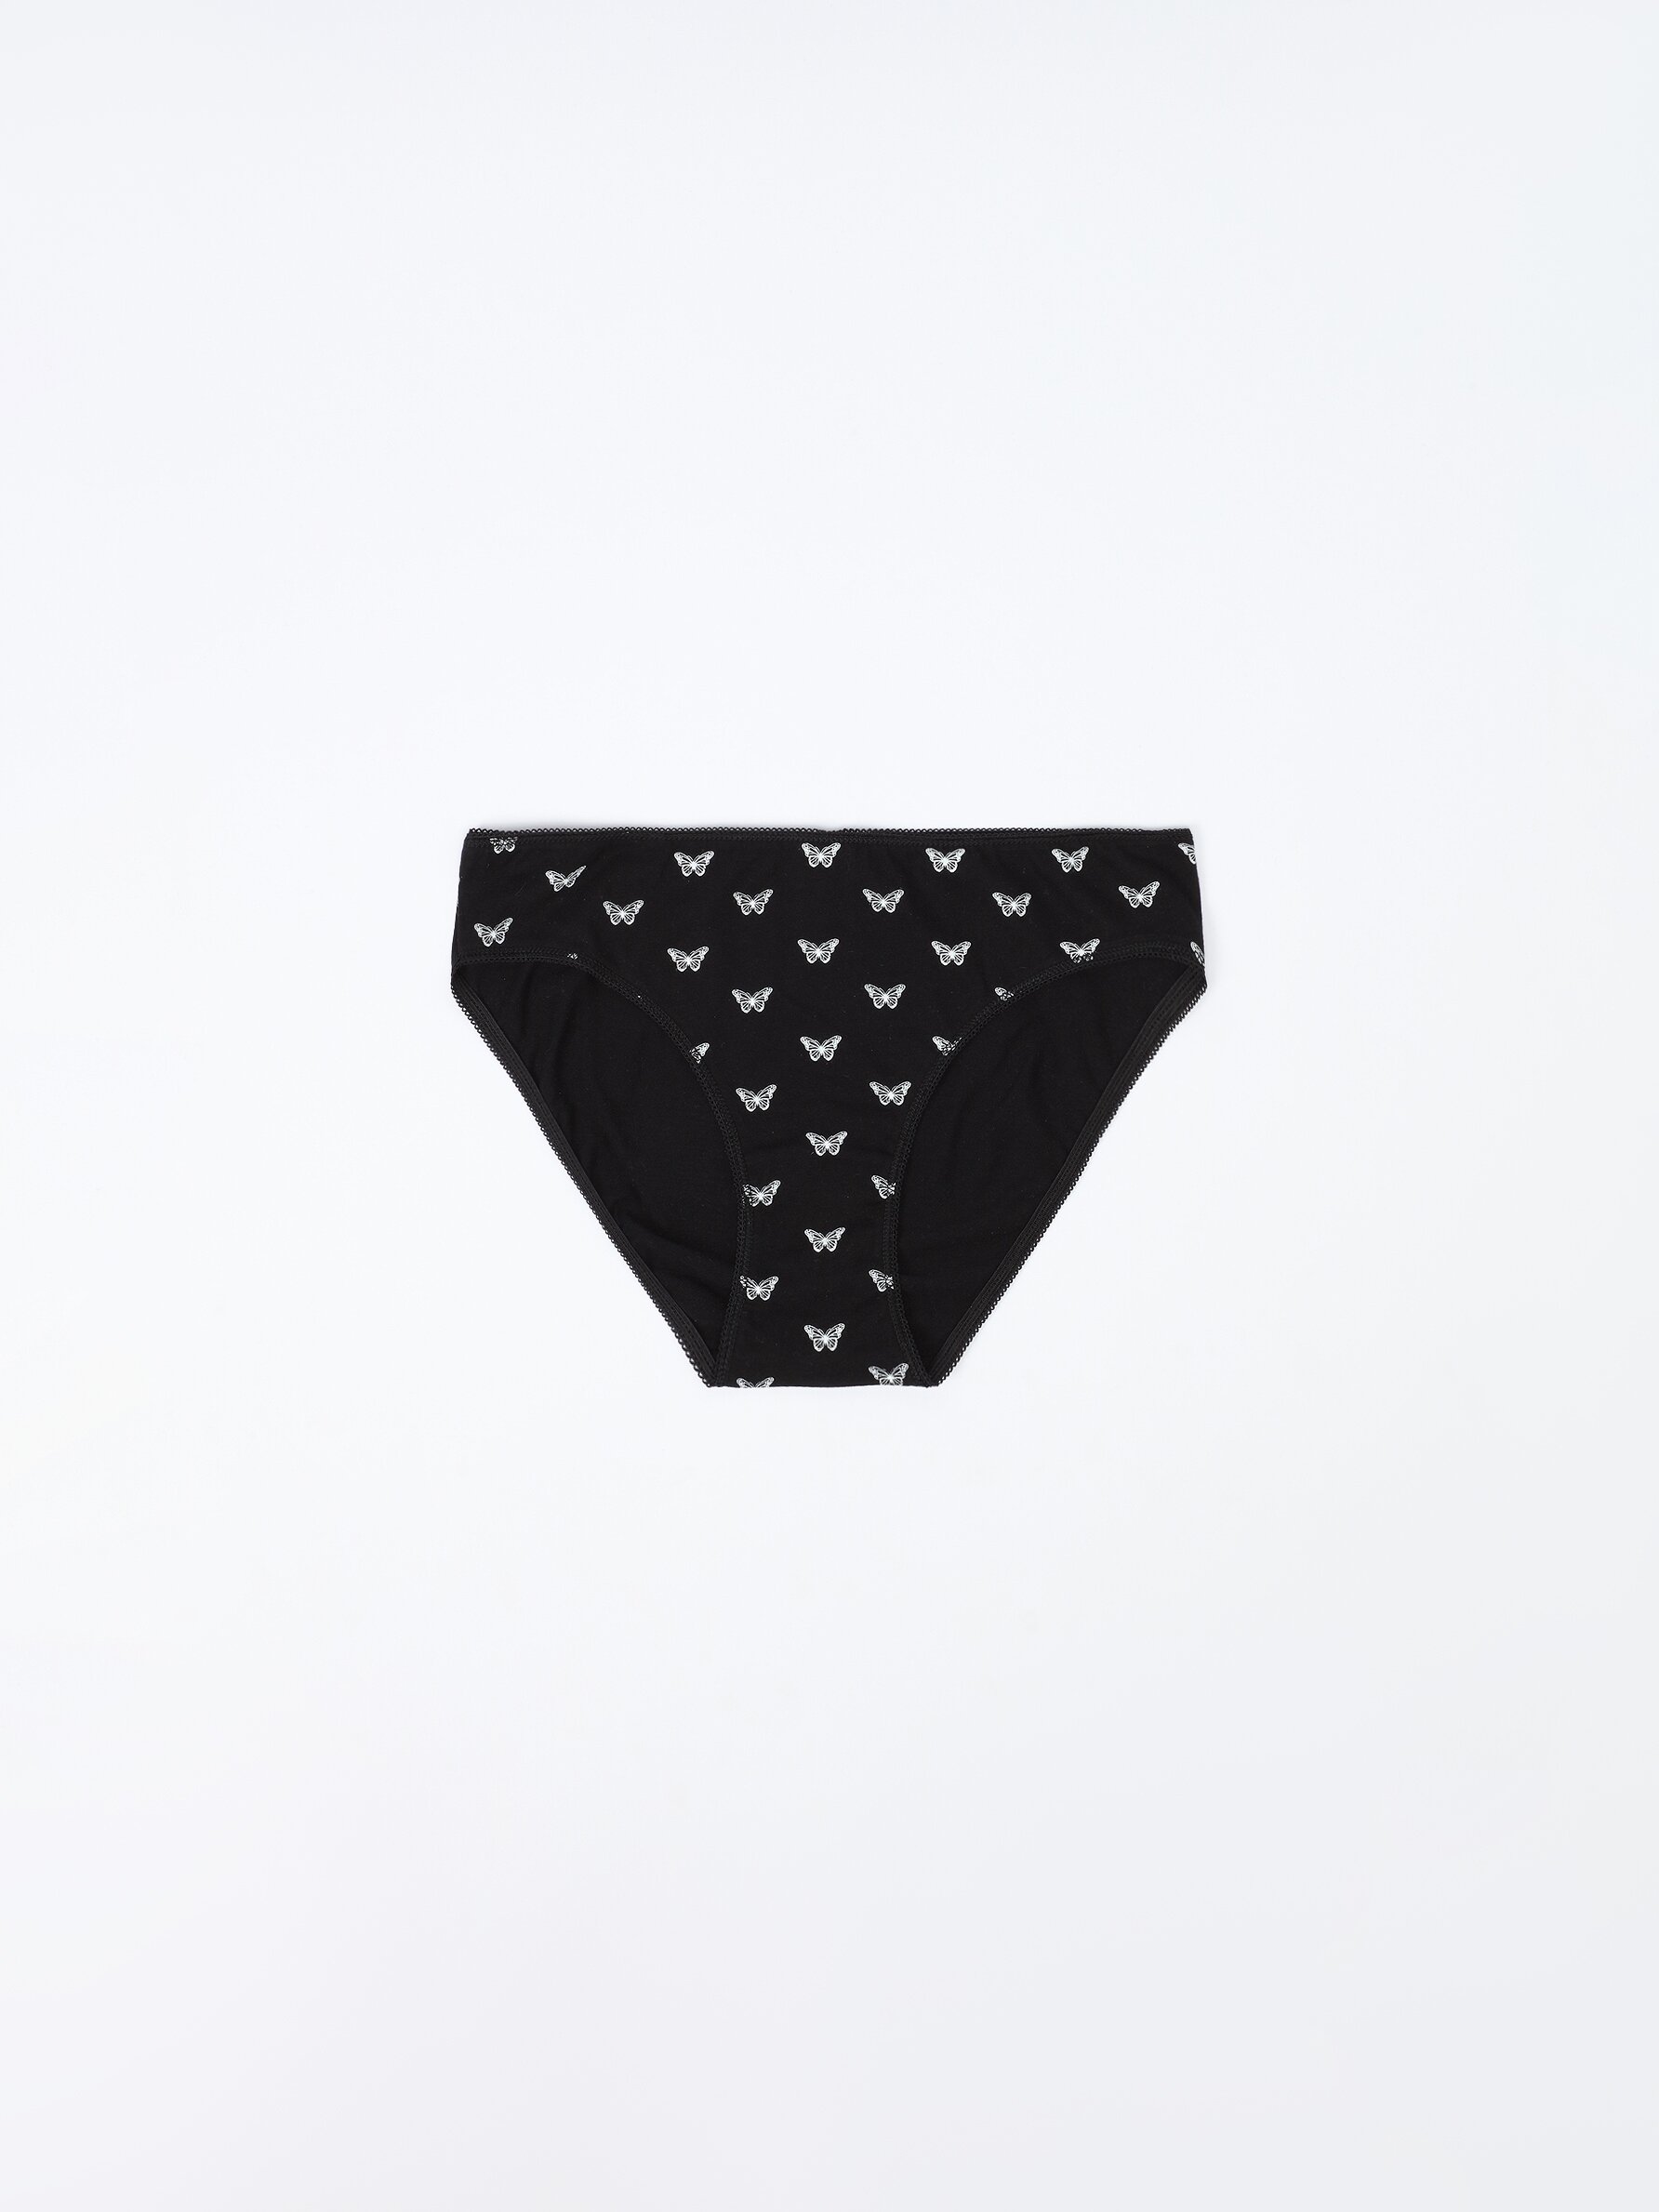 Dotted Cotton Briefs 3 Pack